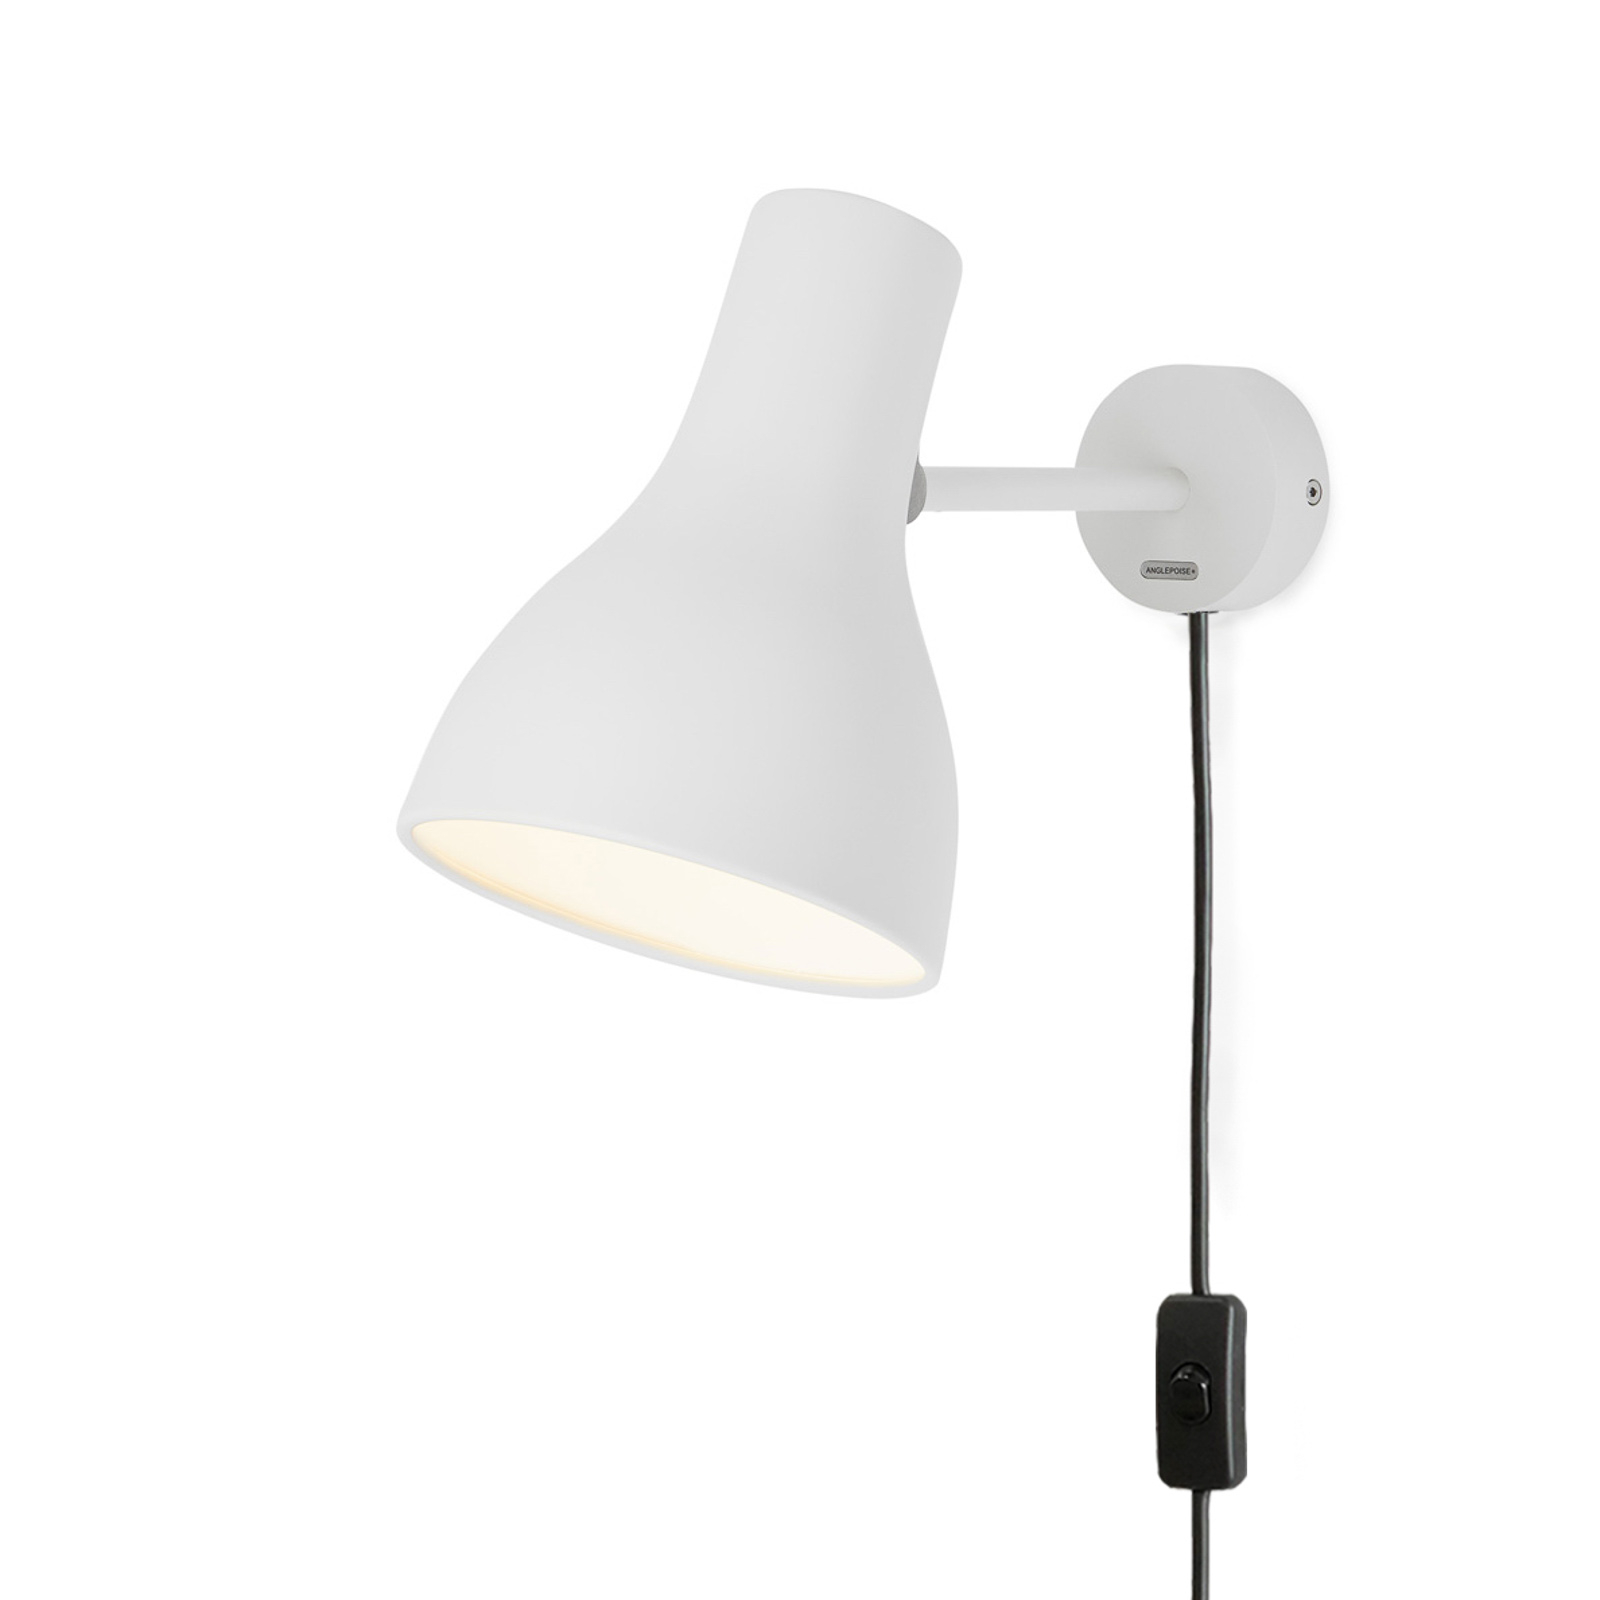 Anglepoise Type 75 wall light with plug, white